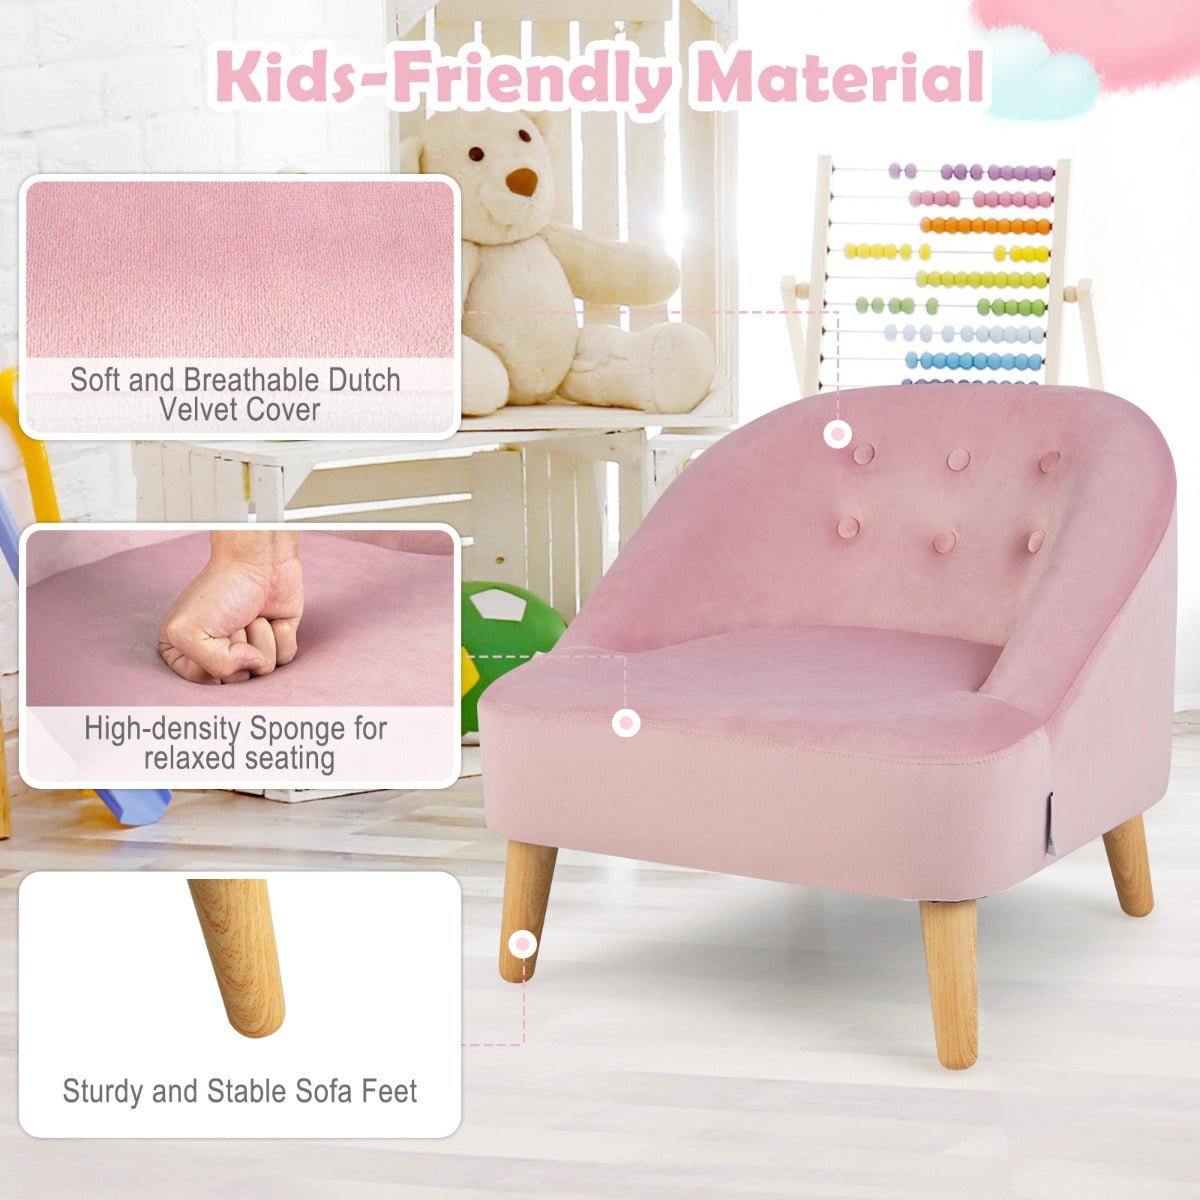 Children's Pink Sofa Chair & Stool - Ages 3-5, Adorable Set